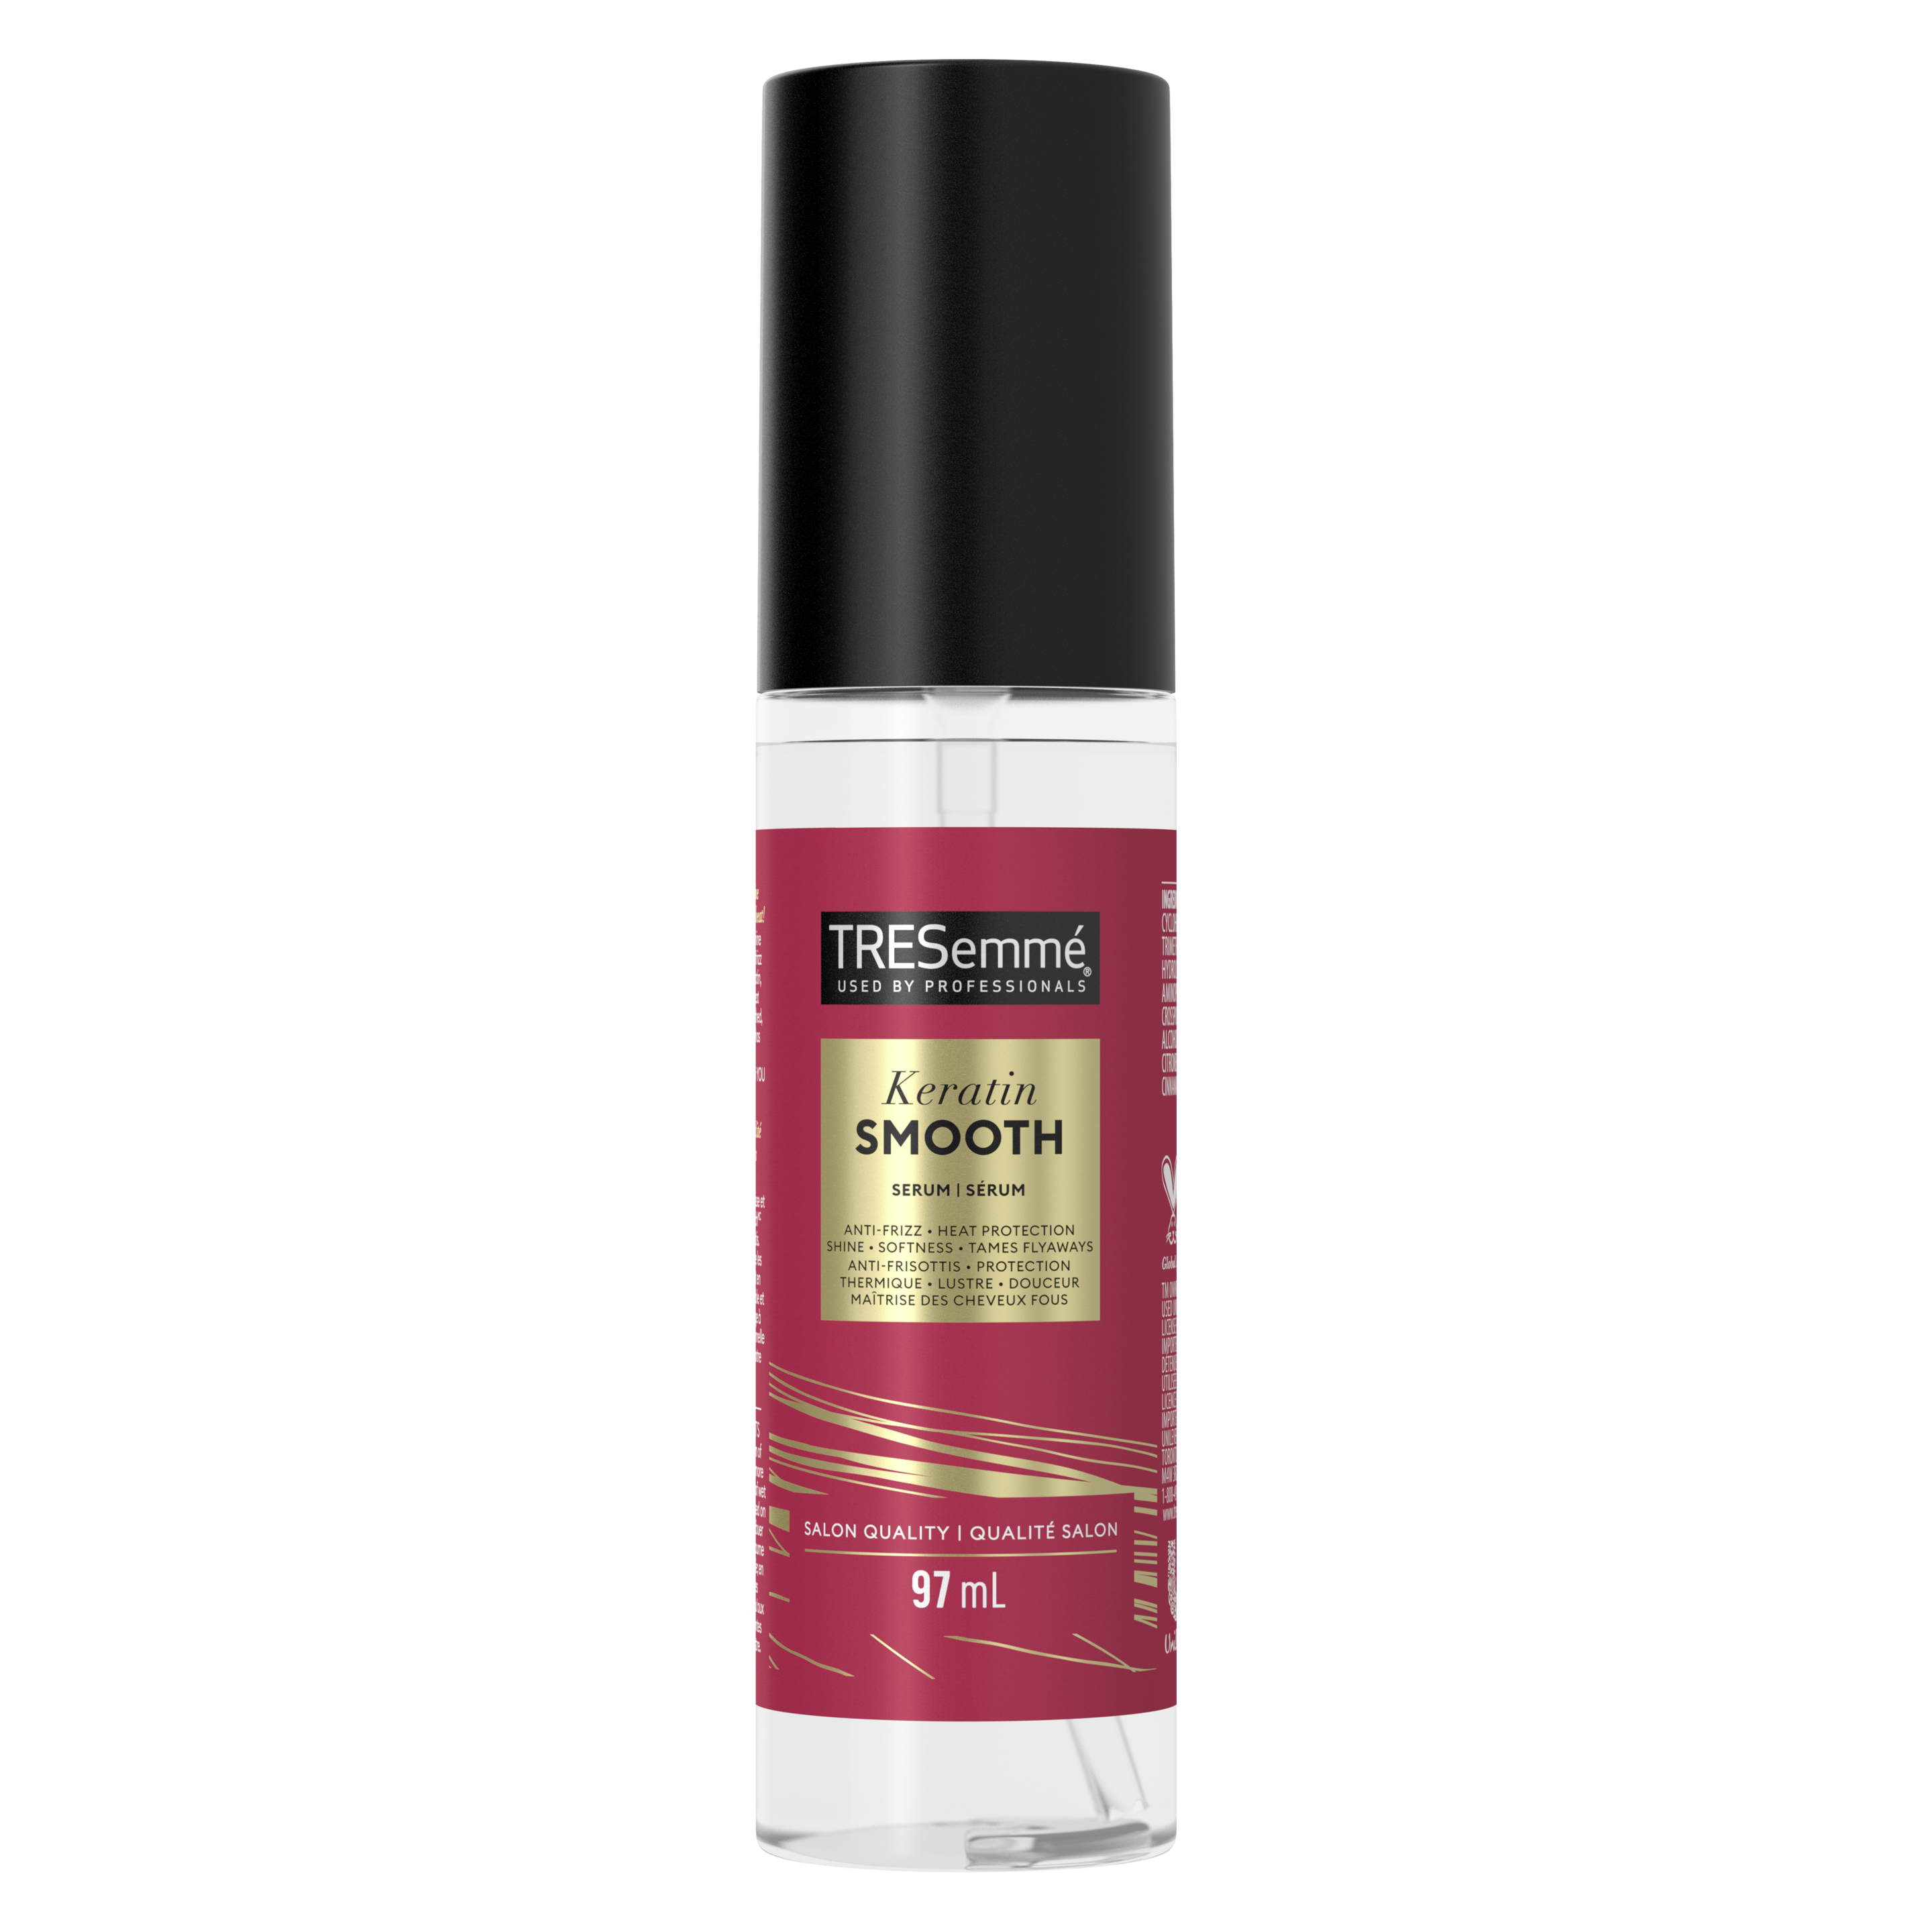 TRESemmé Keratin Smooth Shine Serum | View our product collections